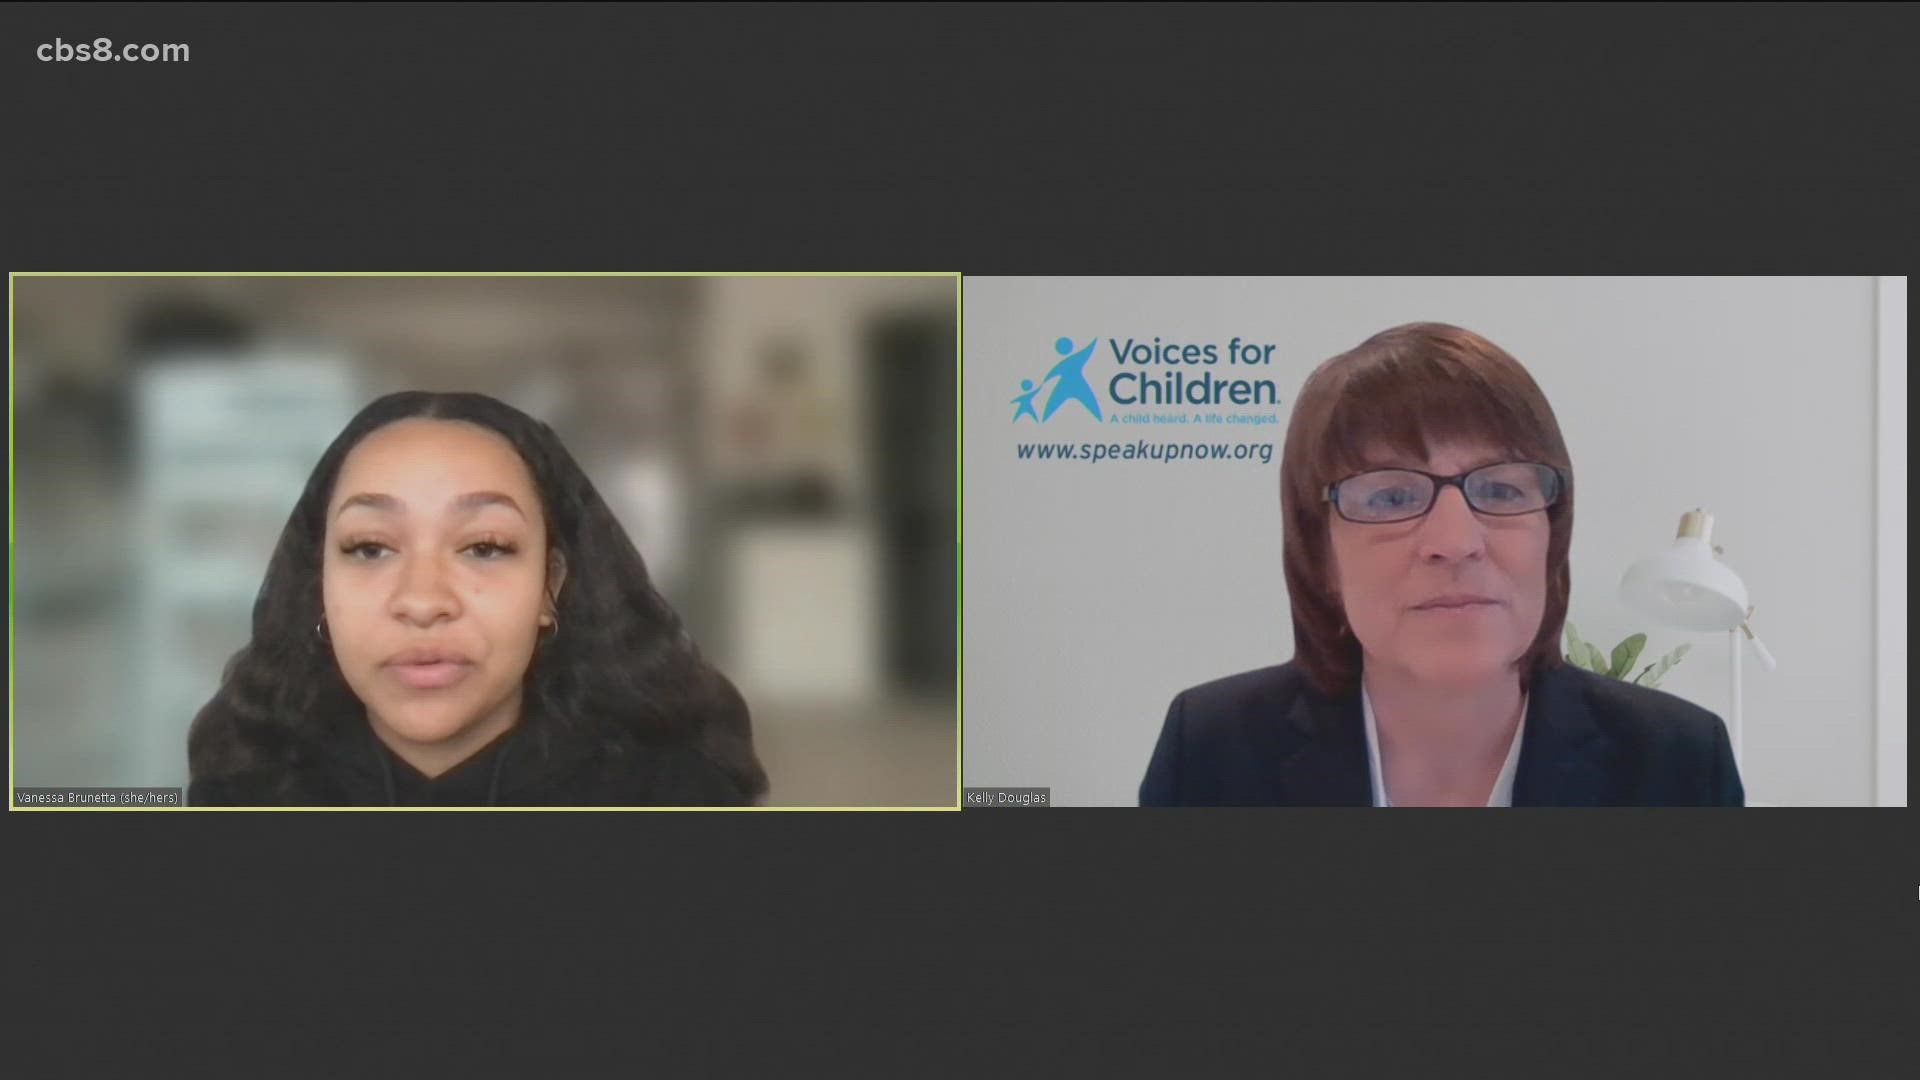 Former foster child Vanessa Brunetta and Voices for Children CEO, Kelly Kapen Douglas joined Morning Extra to talk about the event and how they need help.